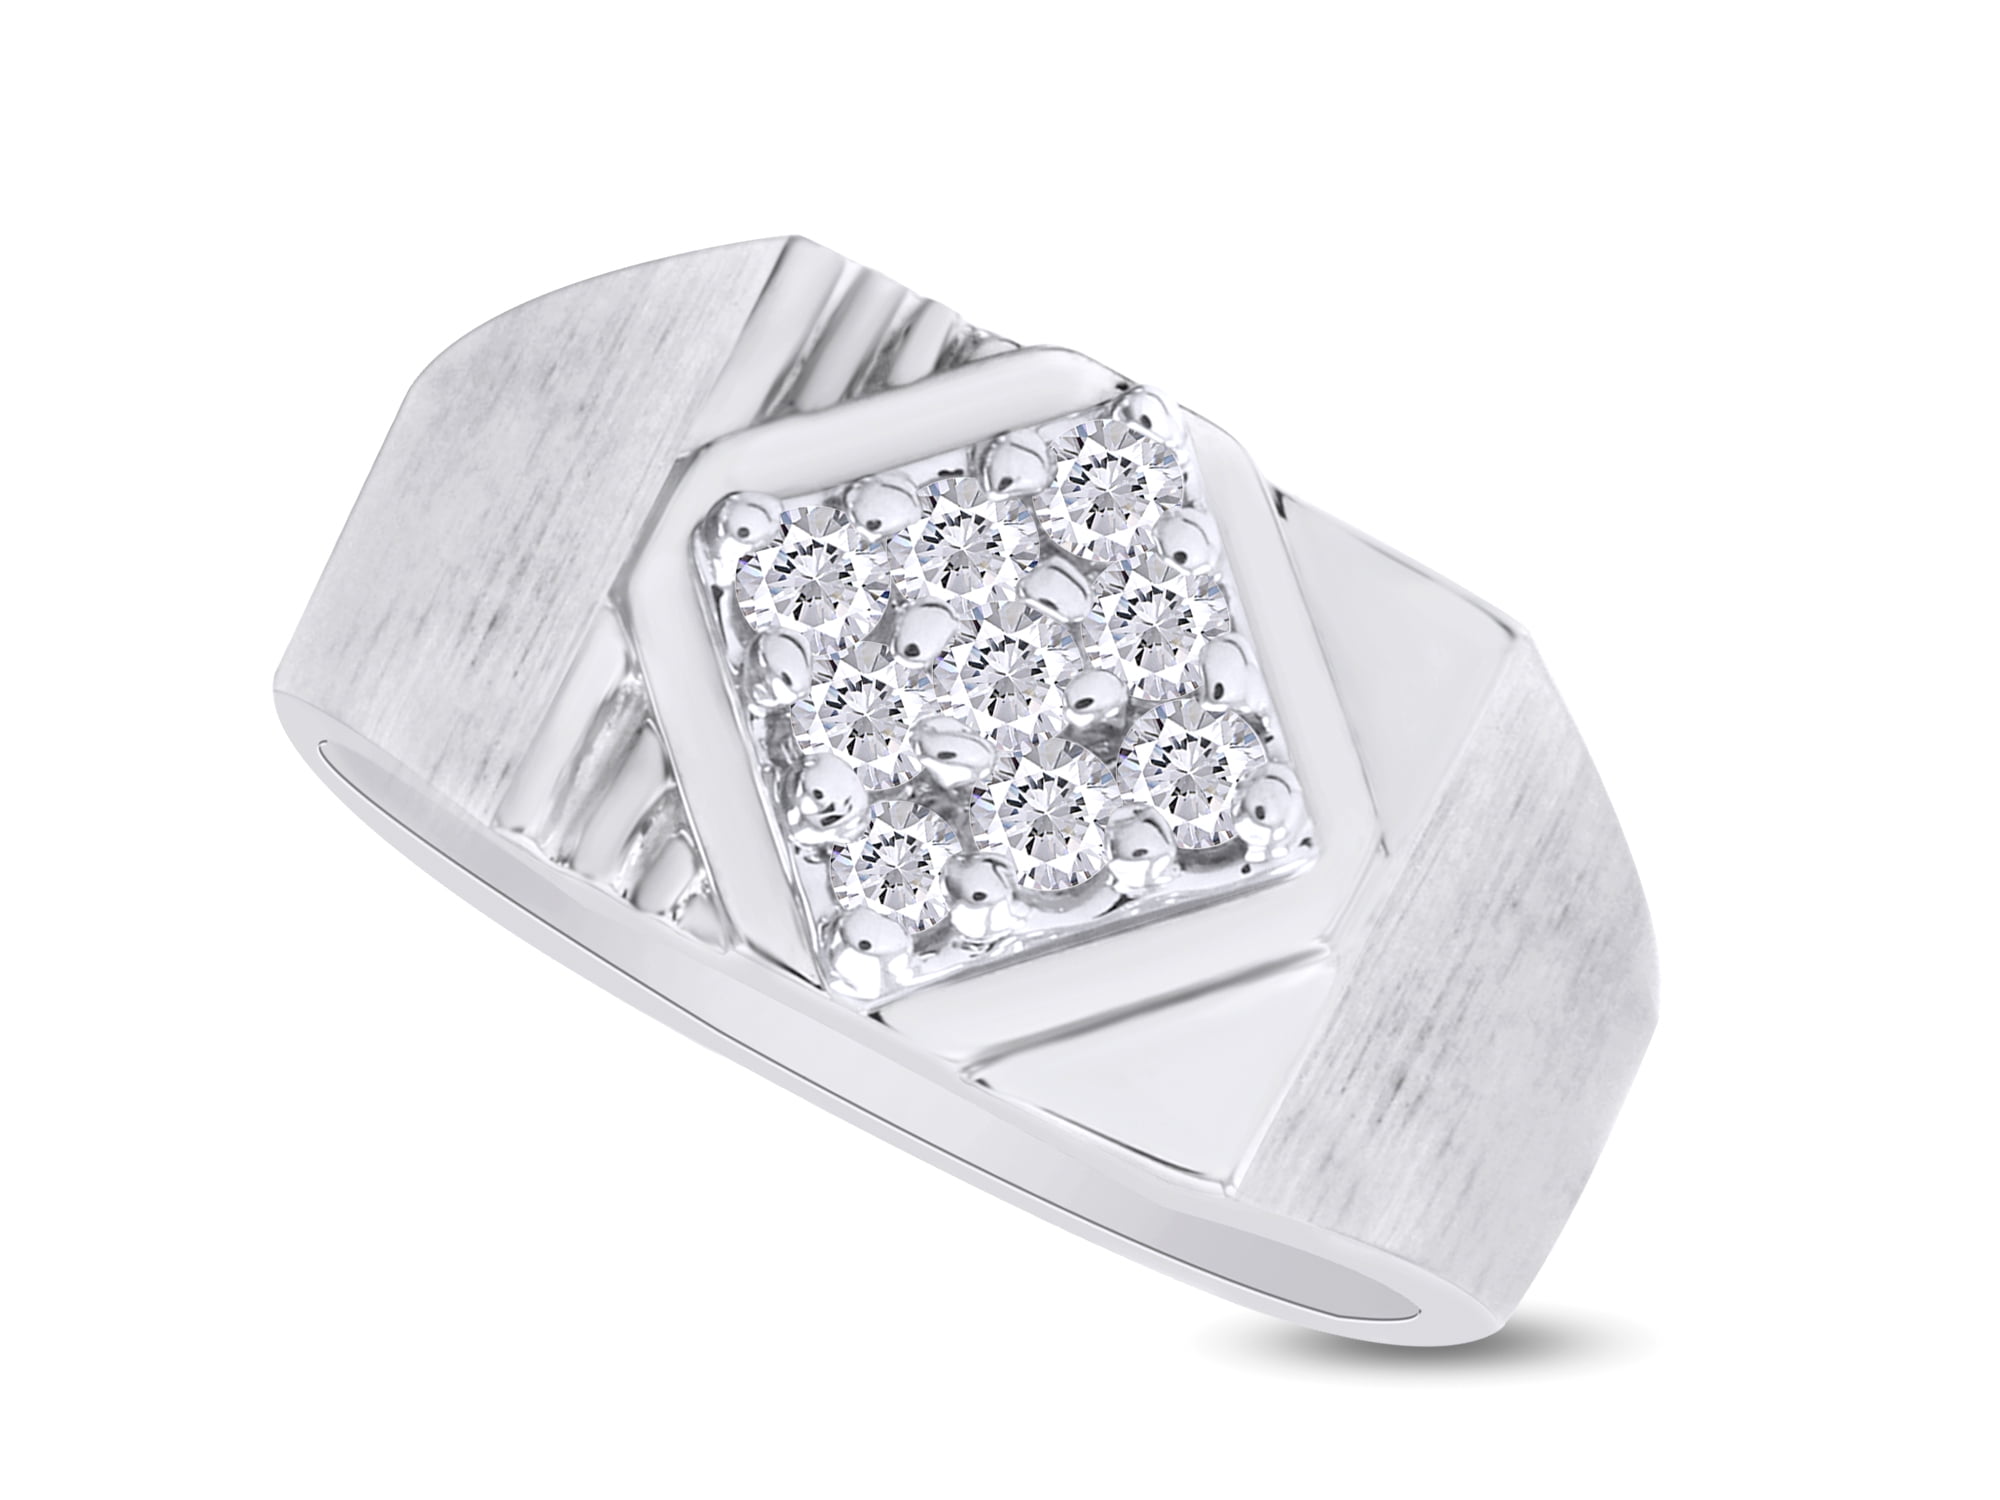 Wishrocks Round Cut White Cubic Zirconia Cluster Ring in 14K Gold Over Sterling Silver